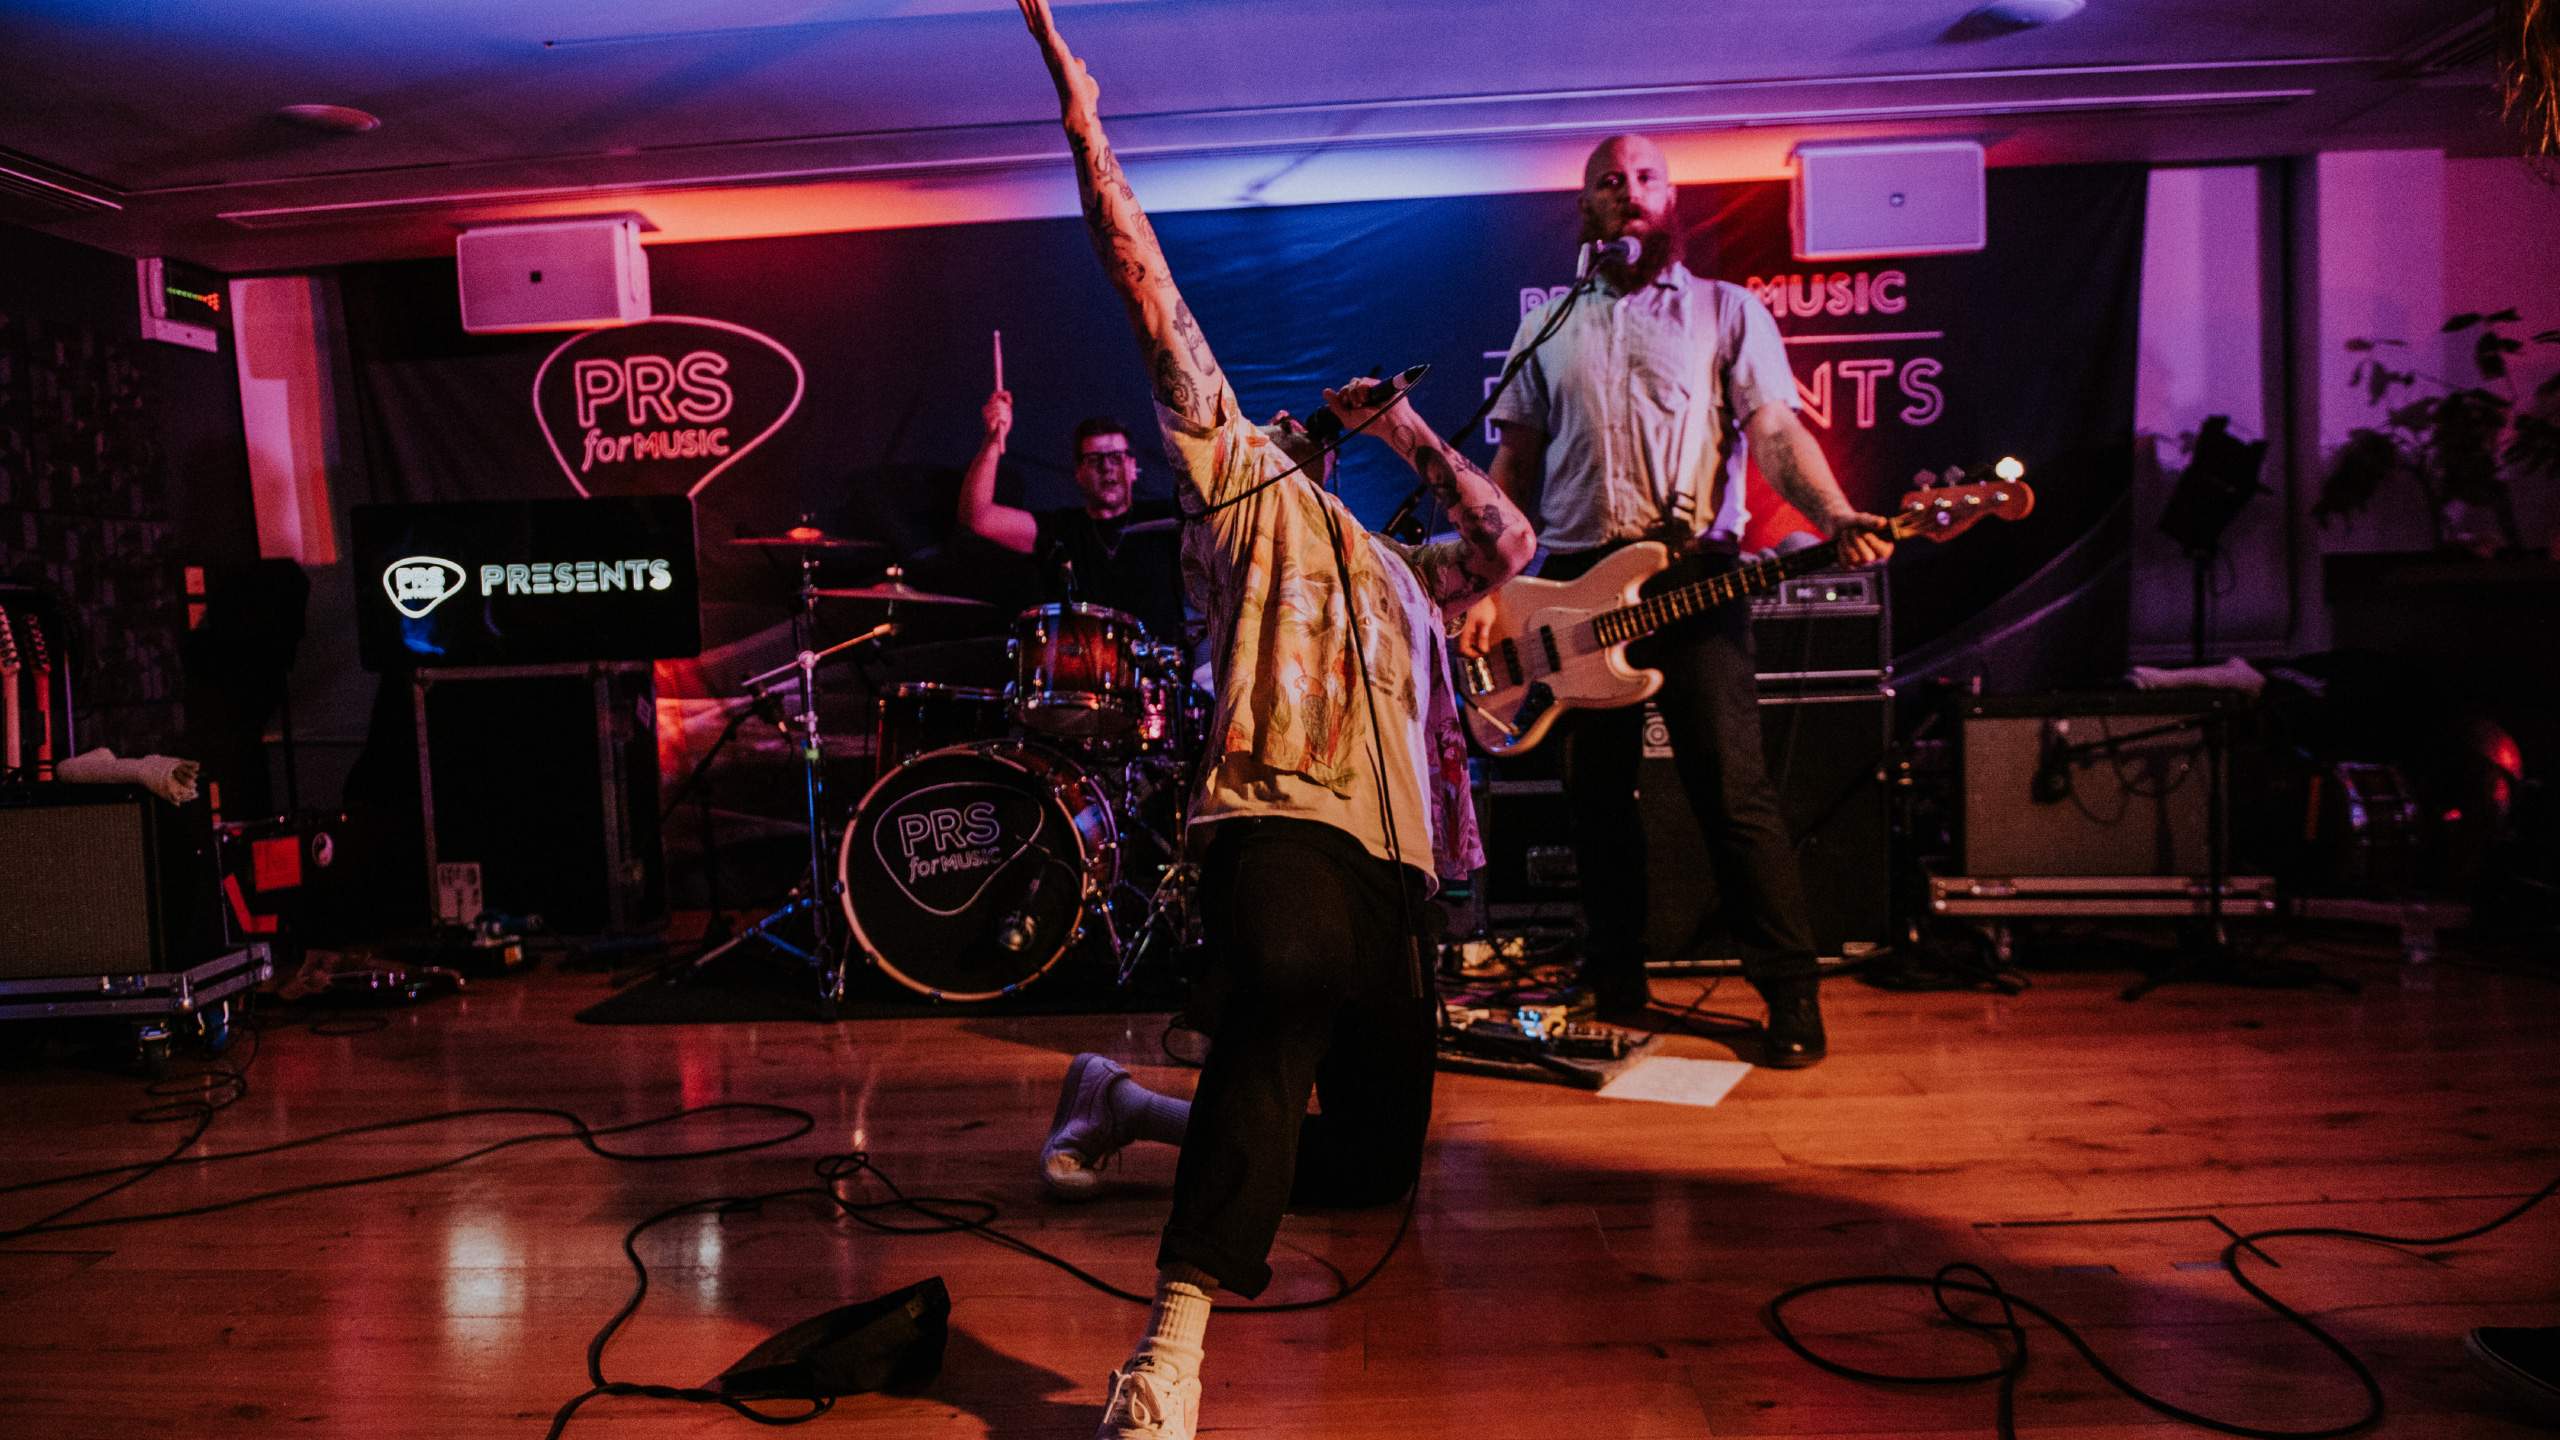 Idles frontman Joe Talbot kneels and raises his arm on stage at PRS for Music Presents